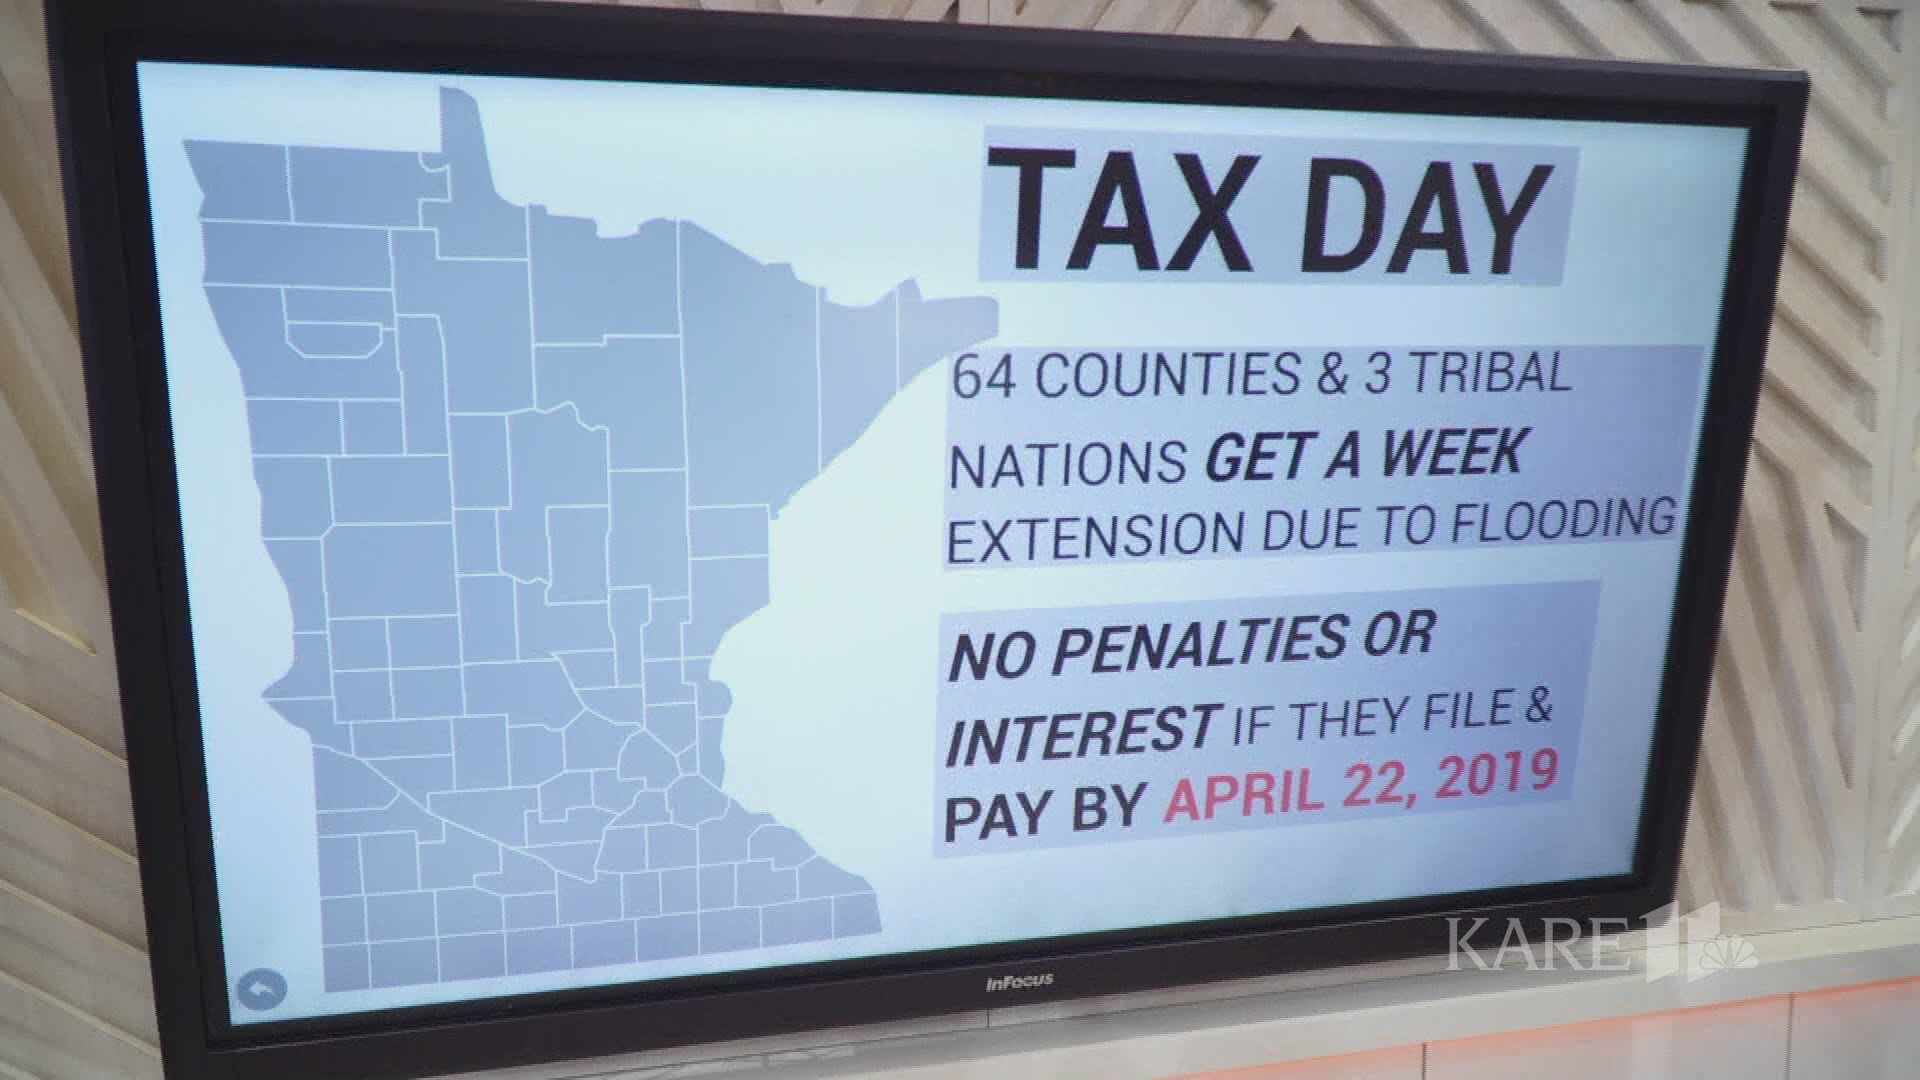 Some Minnesotans who were affected by flooding will get a week extension to file their taxes.